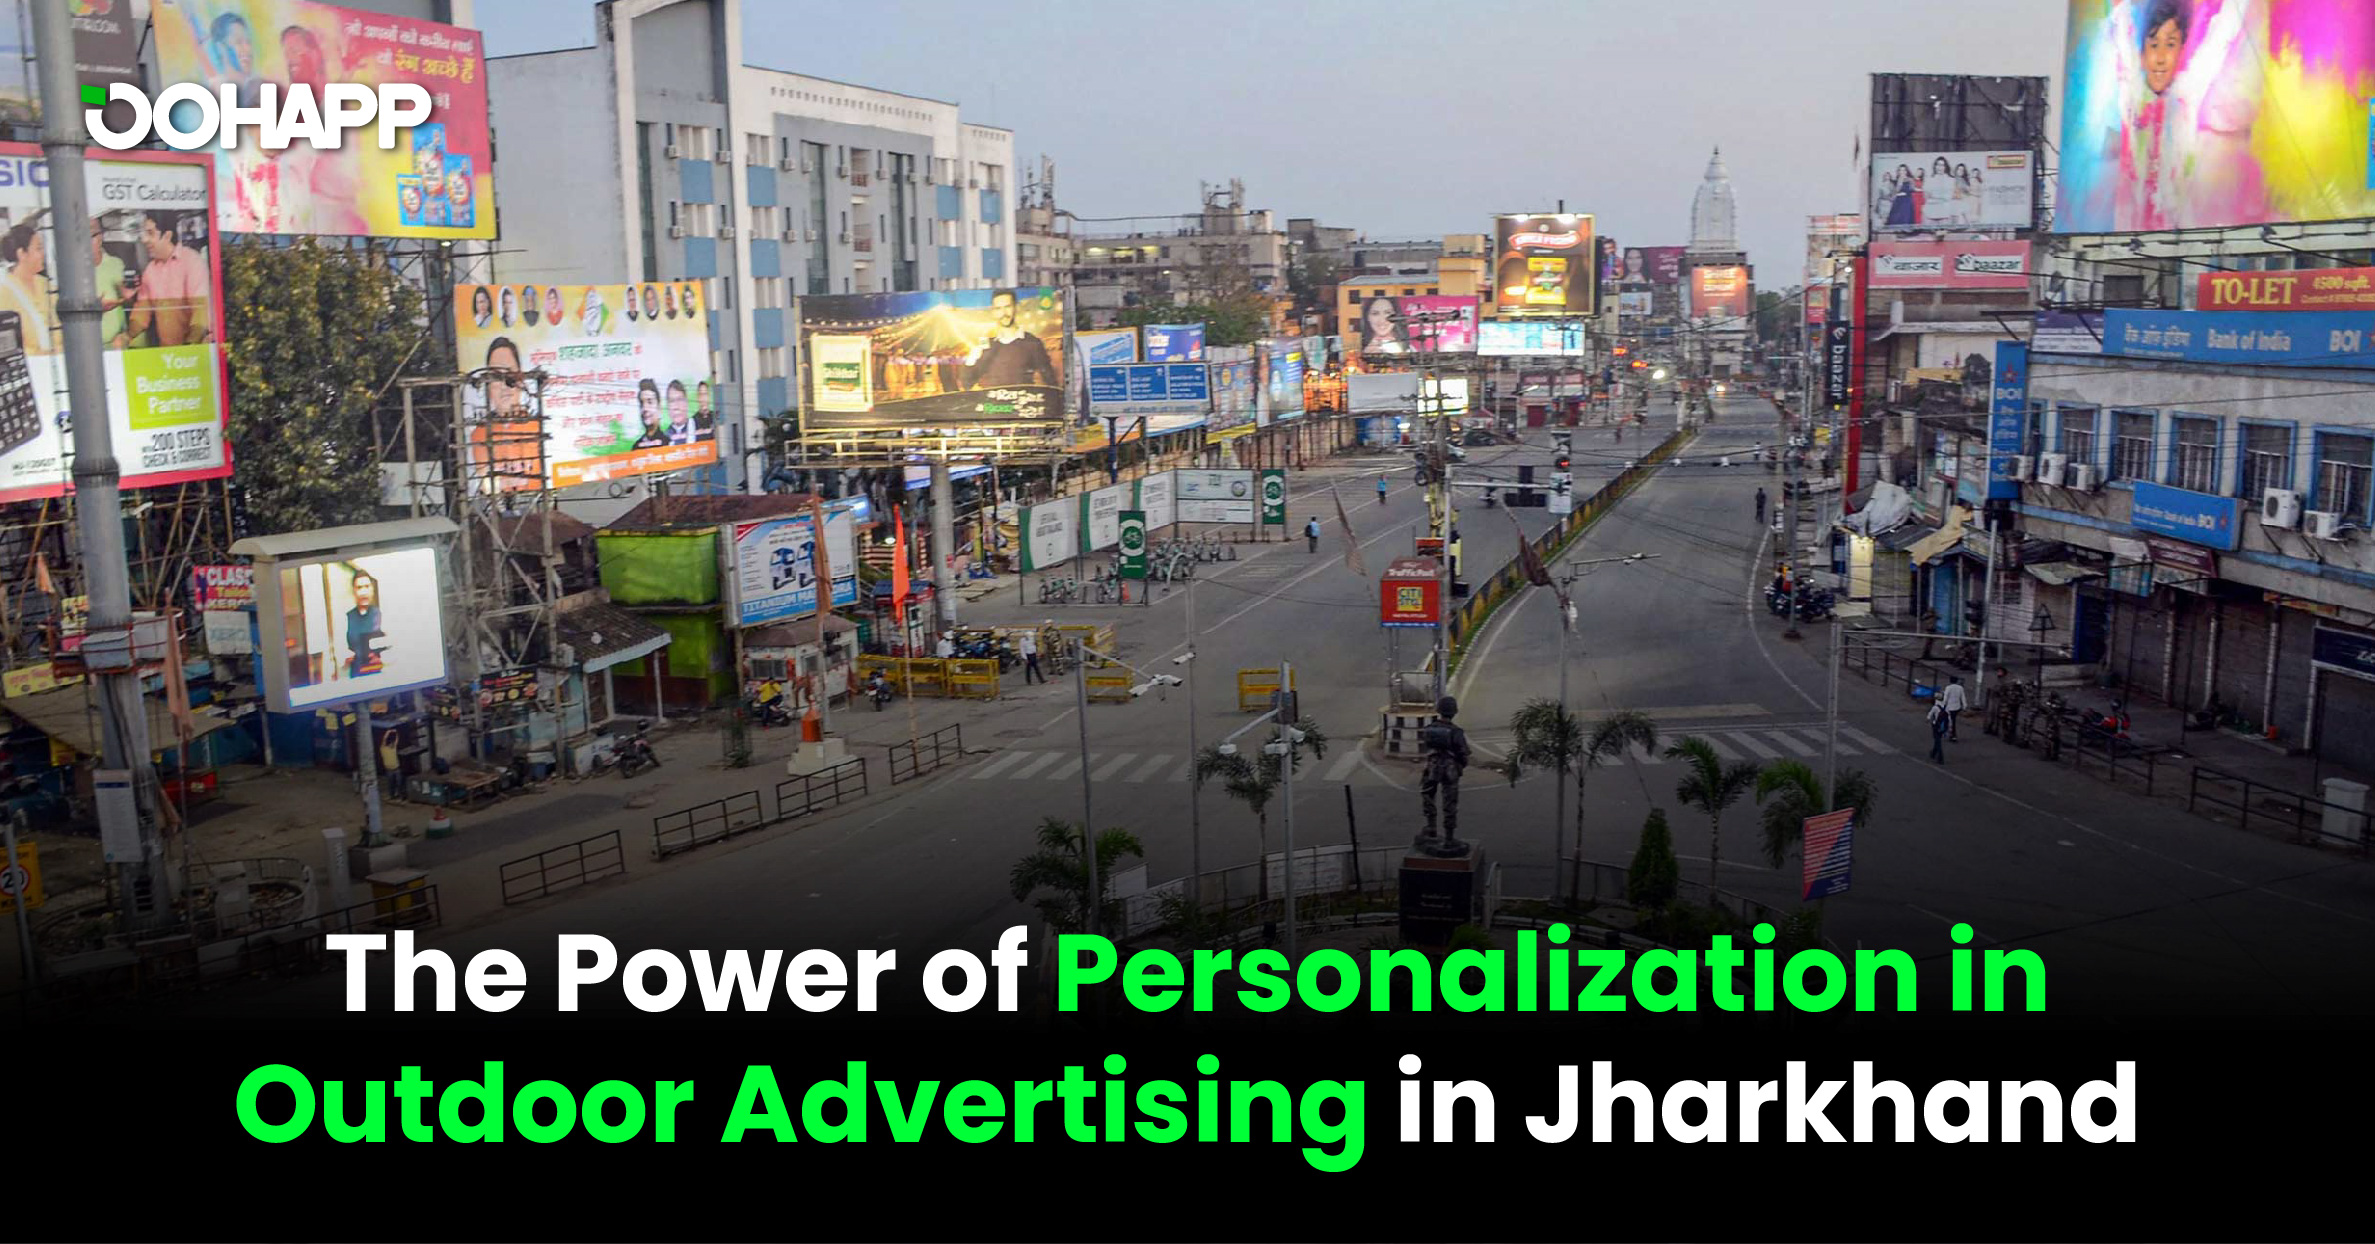 The Power of Personalization in Outdoor Advertising in Jharkhand